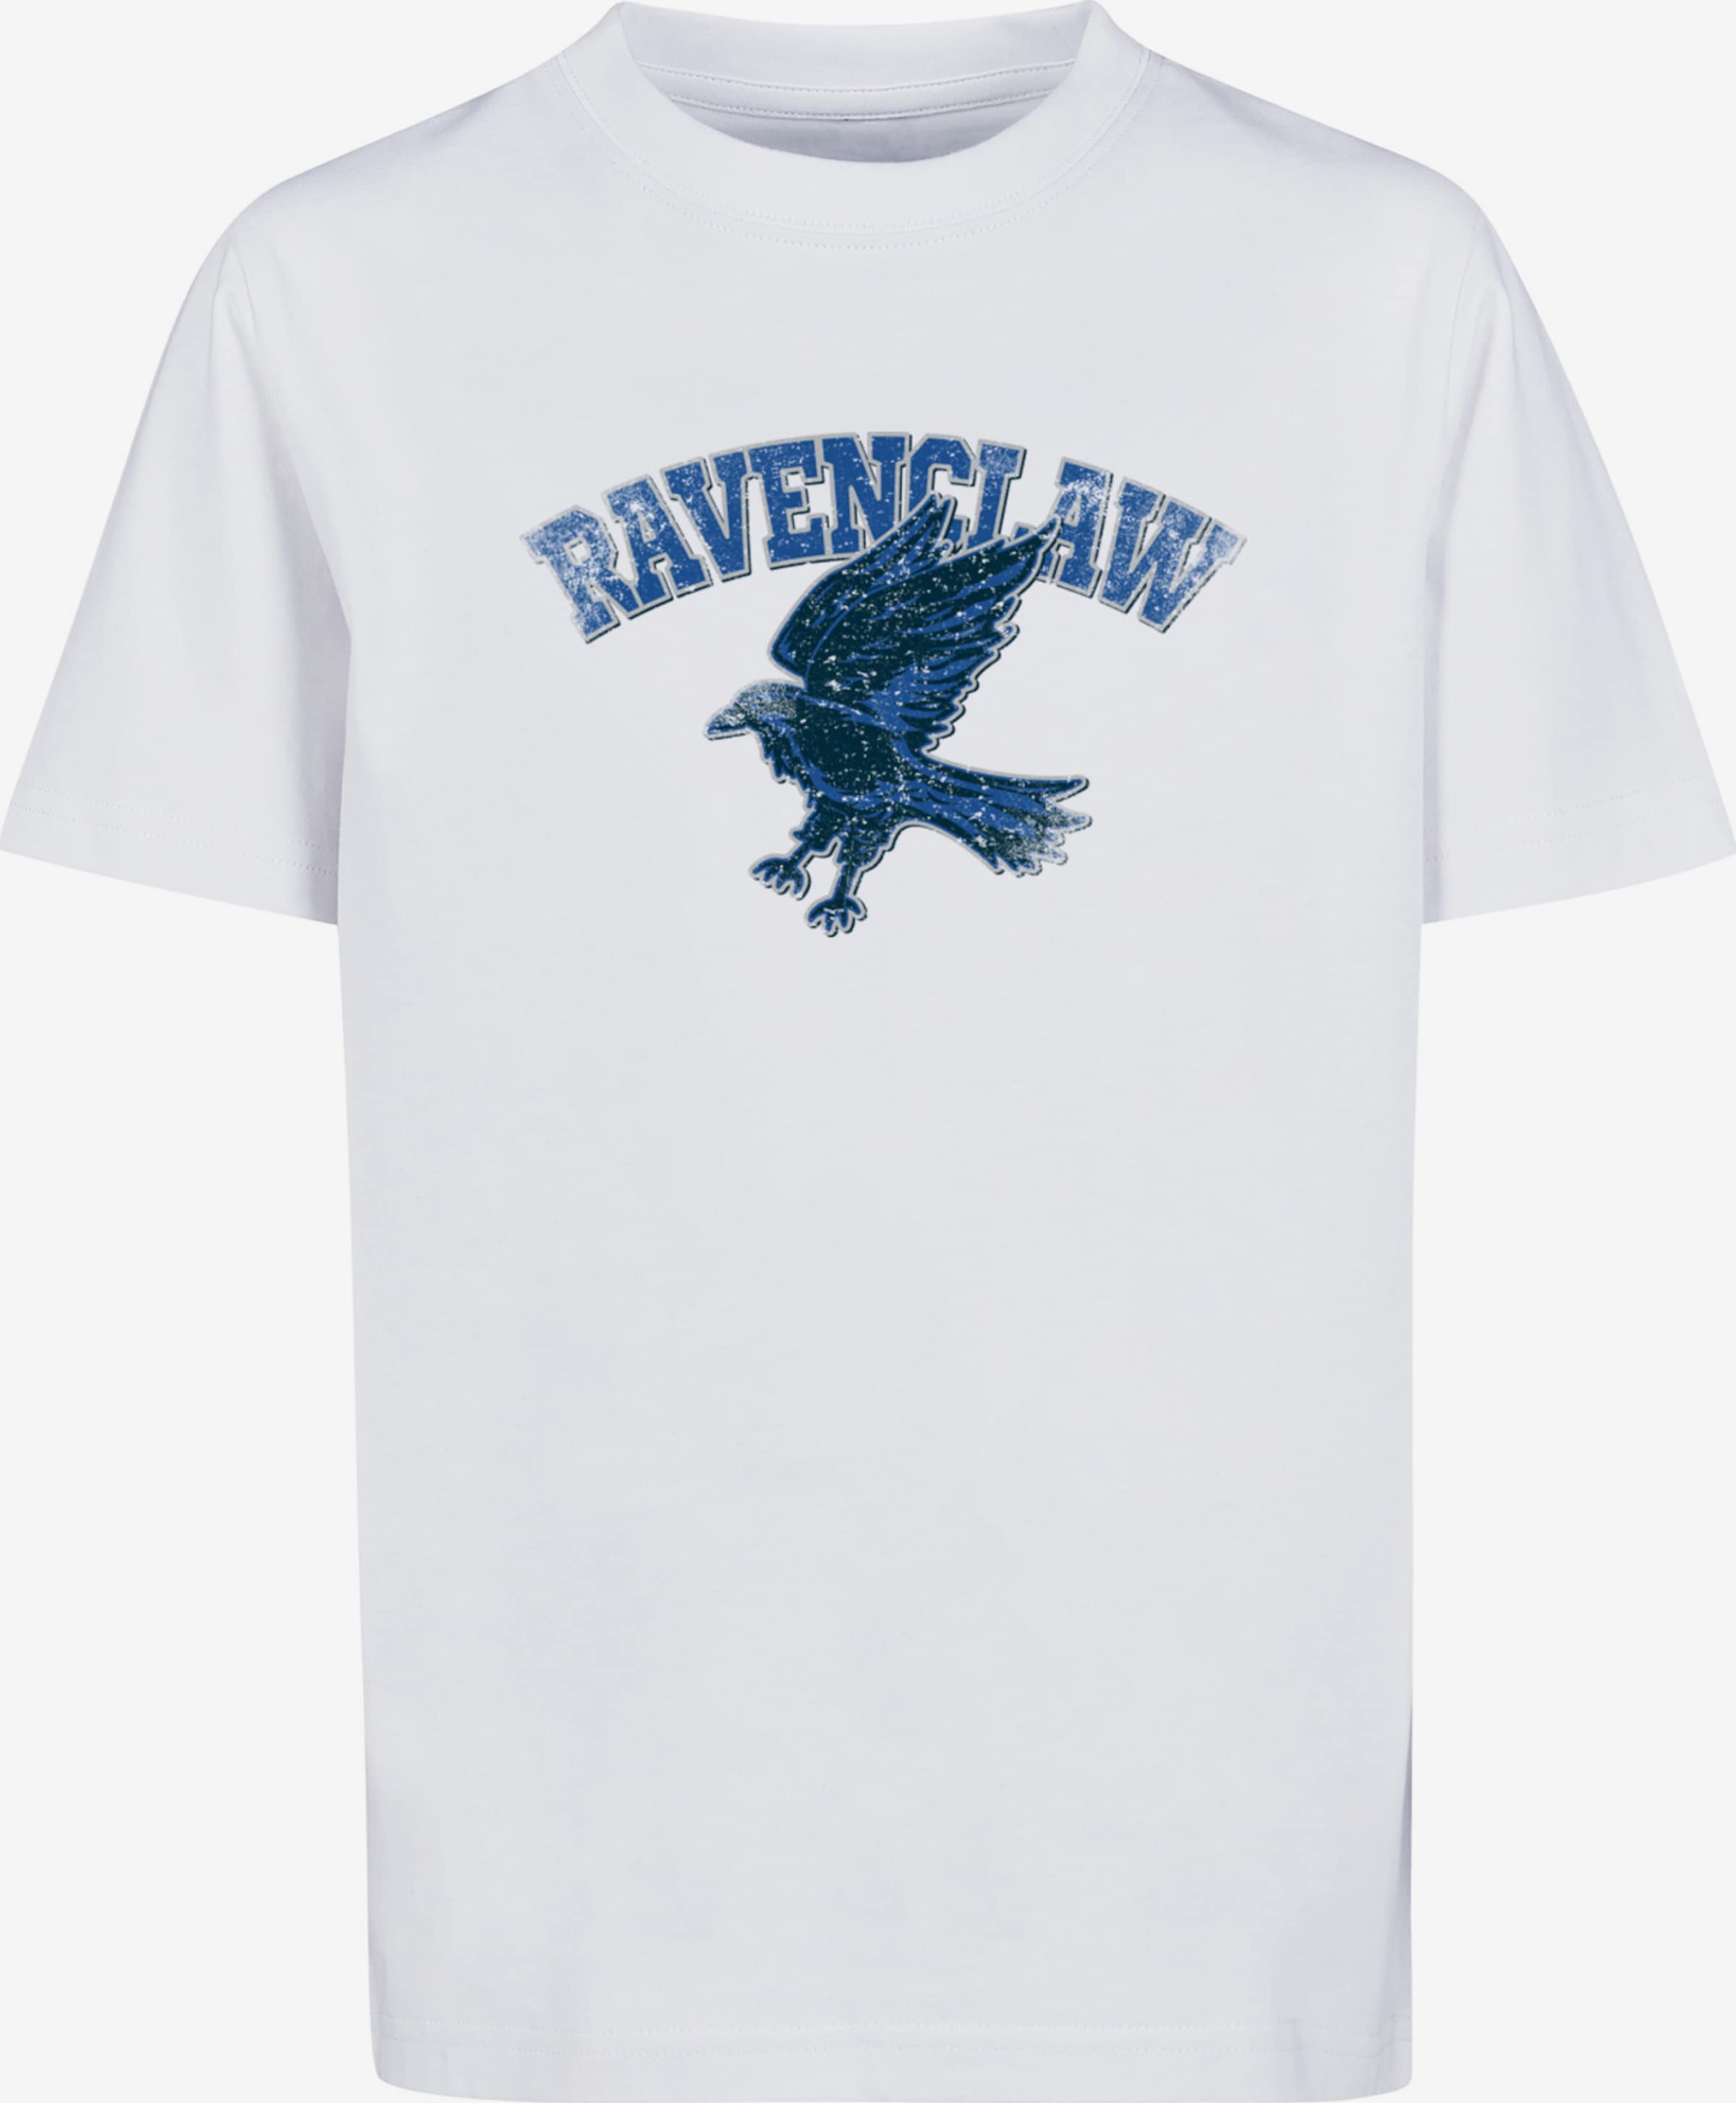 | White in \'Harry ABOUT Emblem\' Ravenclaw F4NT4STIC Sport YOU Potter Shirt